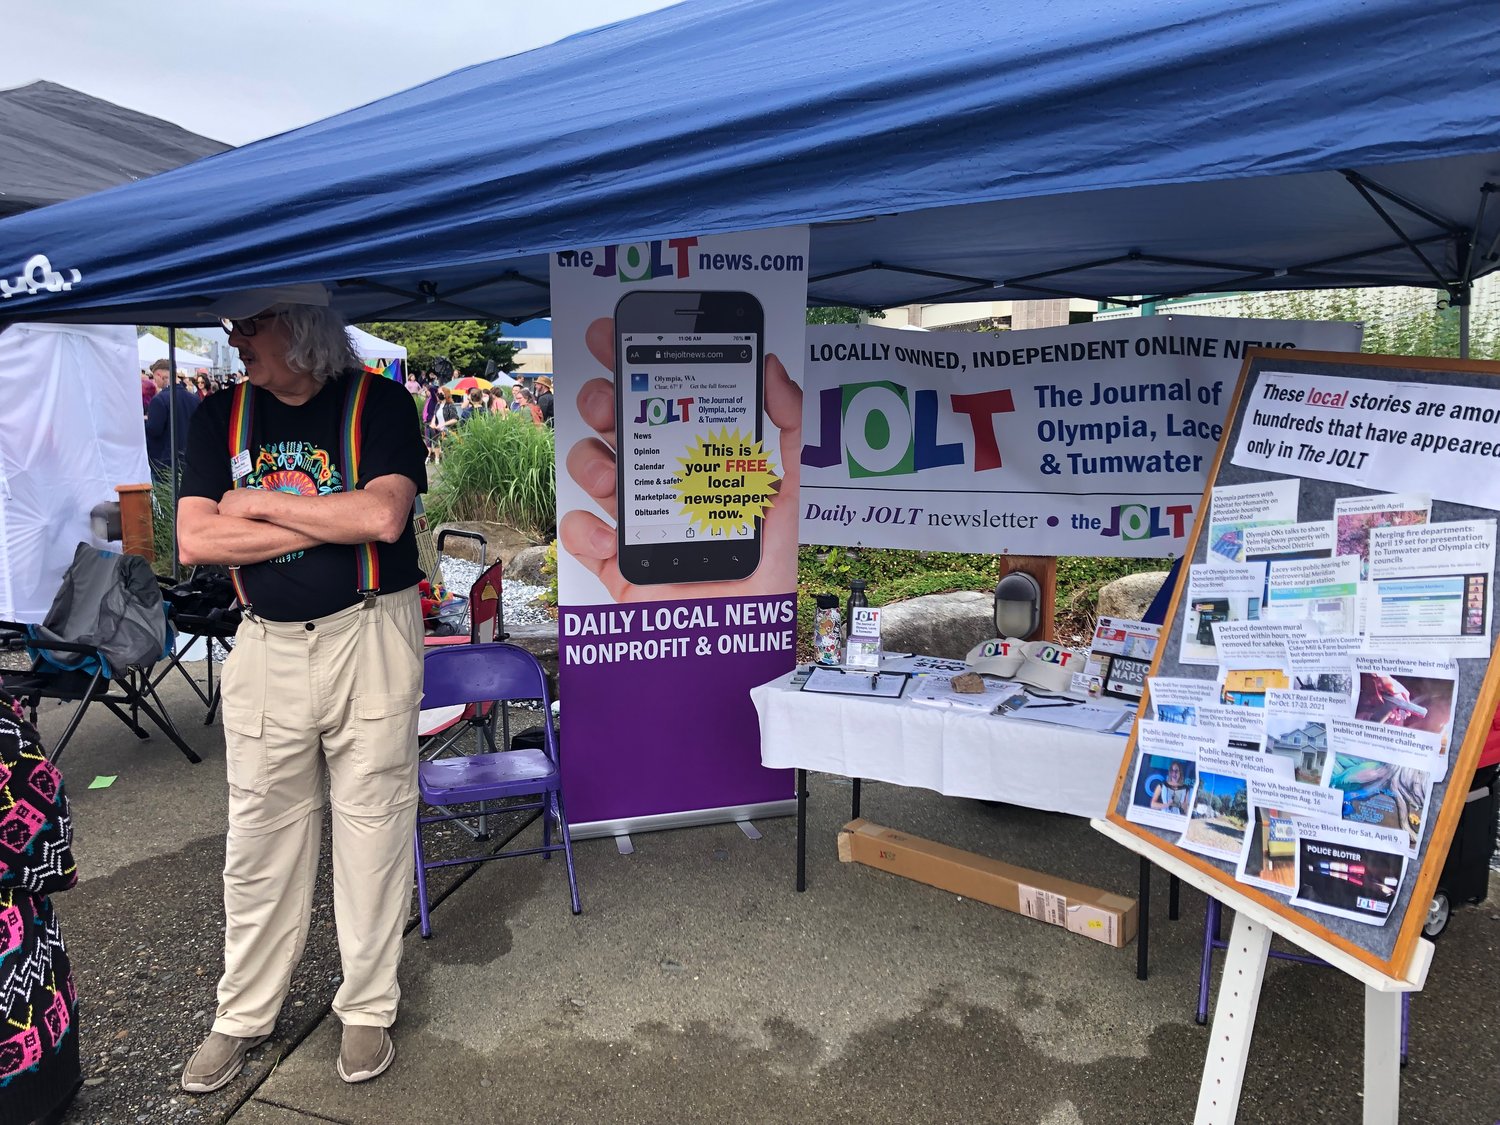 Chuck Pfeil, treasurer of The JOLT News Organization spoke with scores of people curious about this new news organization at Capital City Pride Day, June 4, 2022.